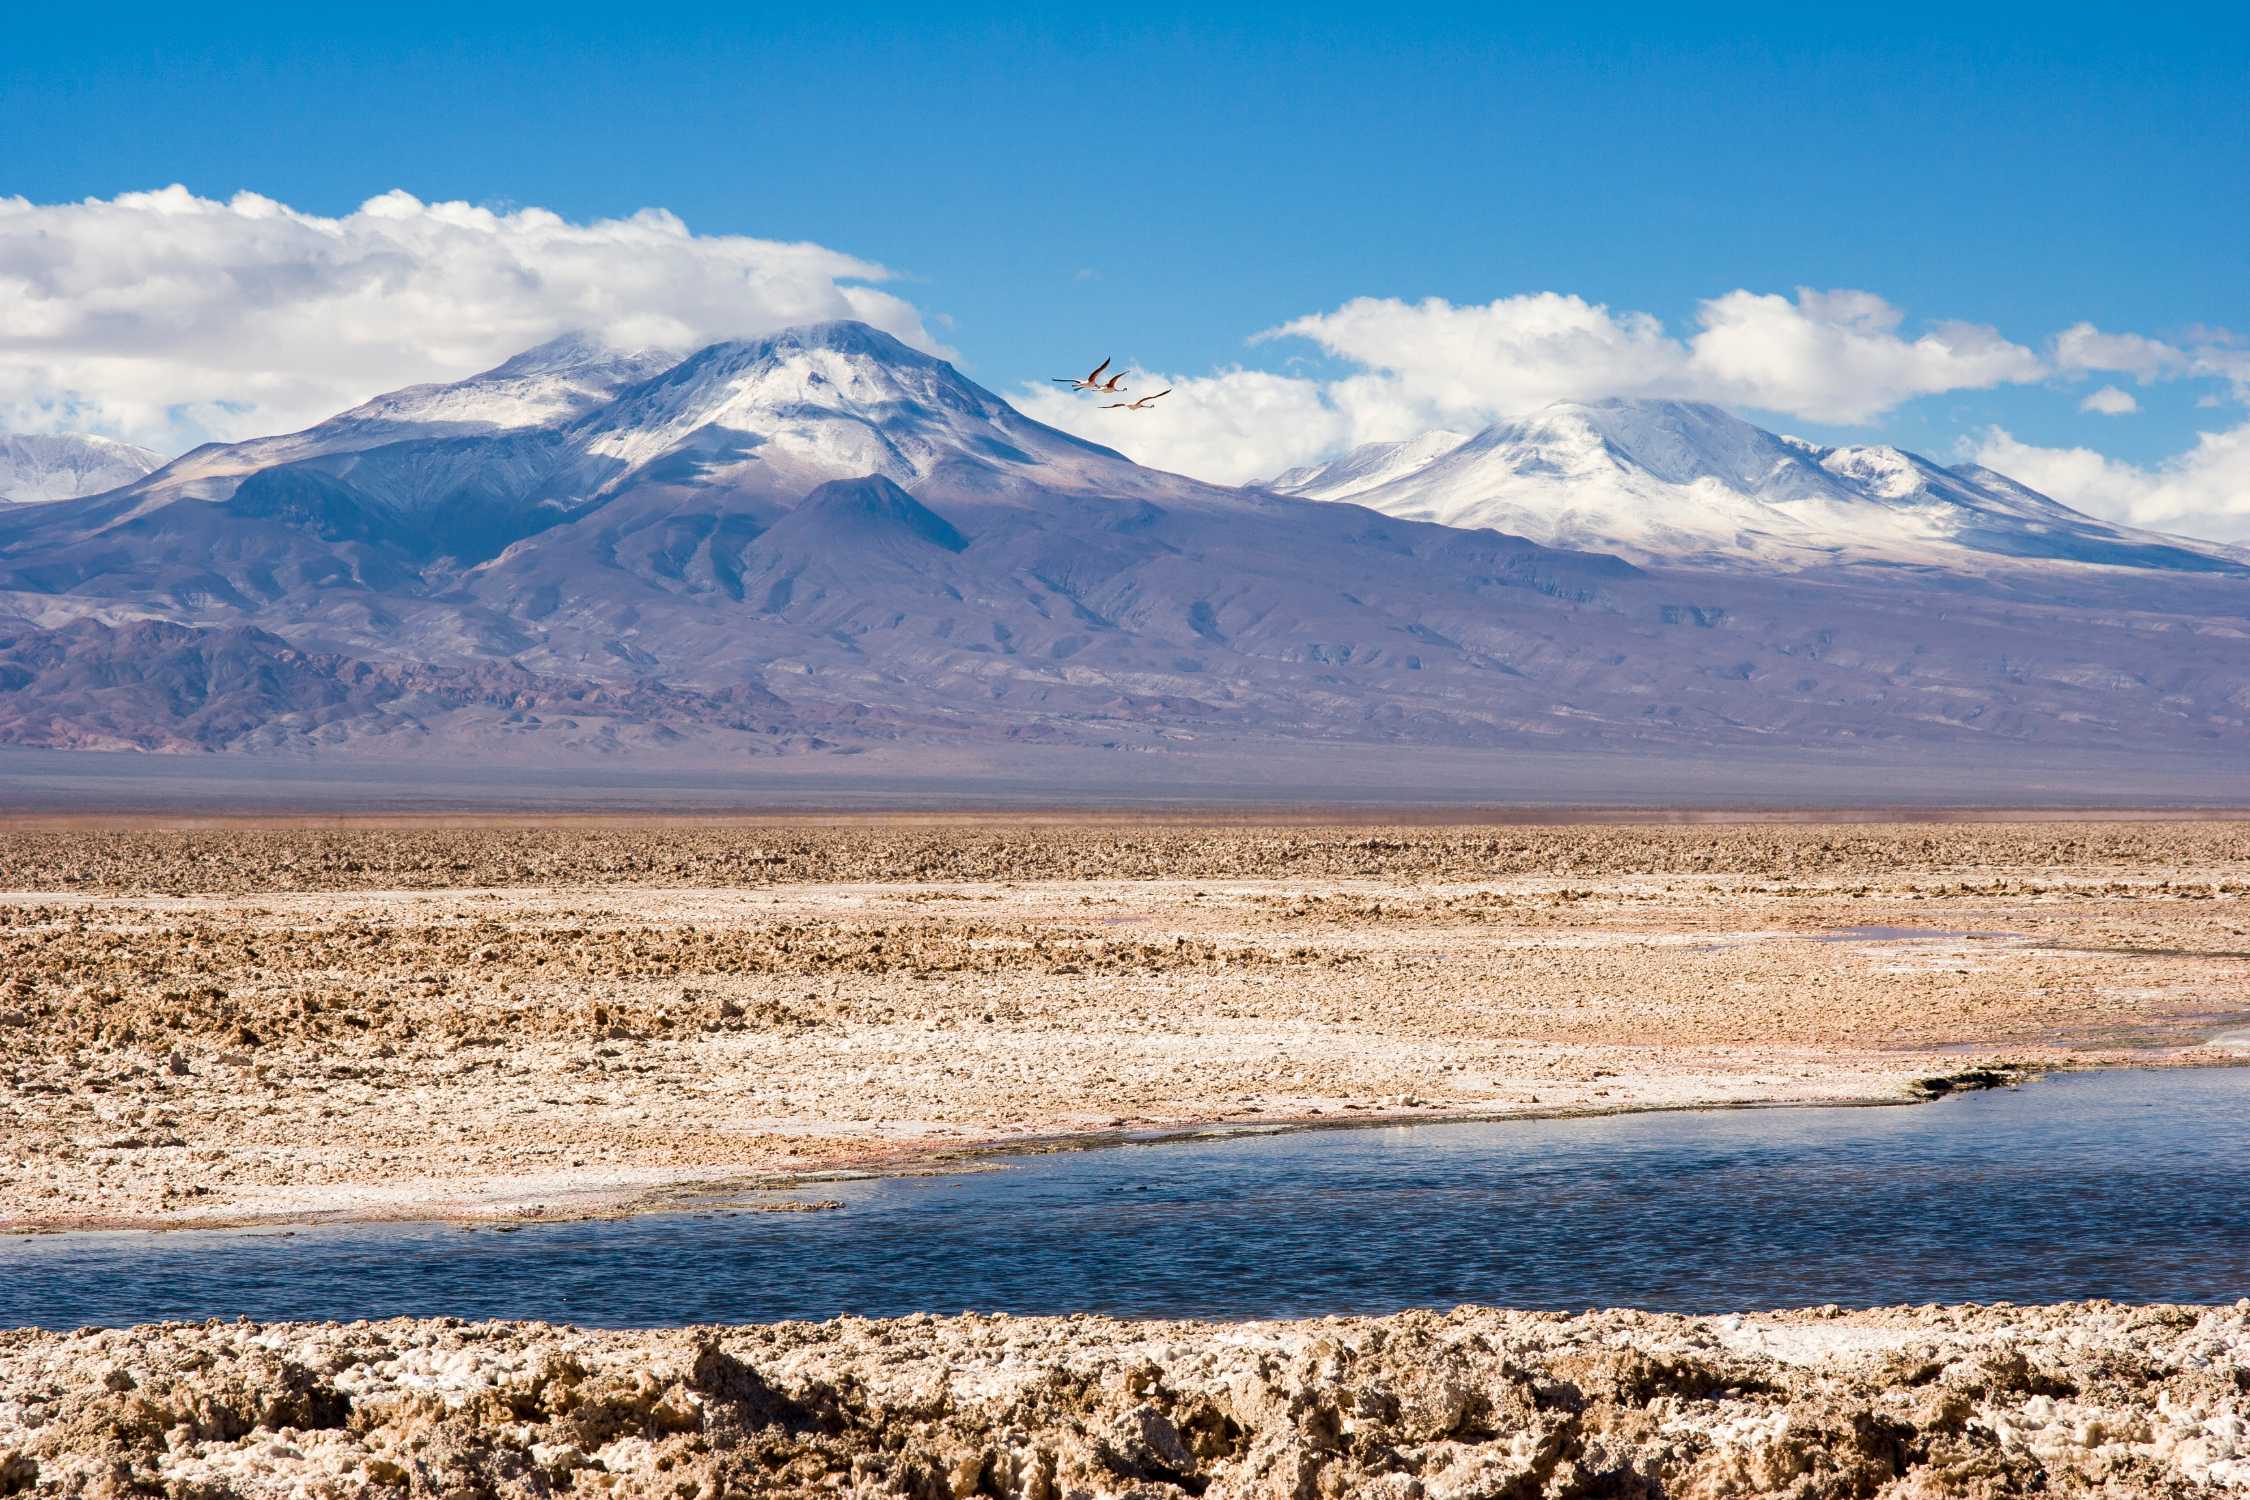 BMW participates in sustainable lithium mining project in Chile